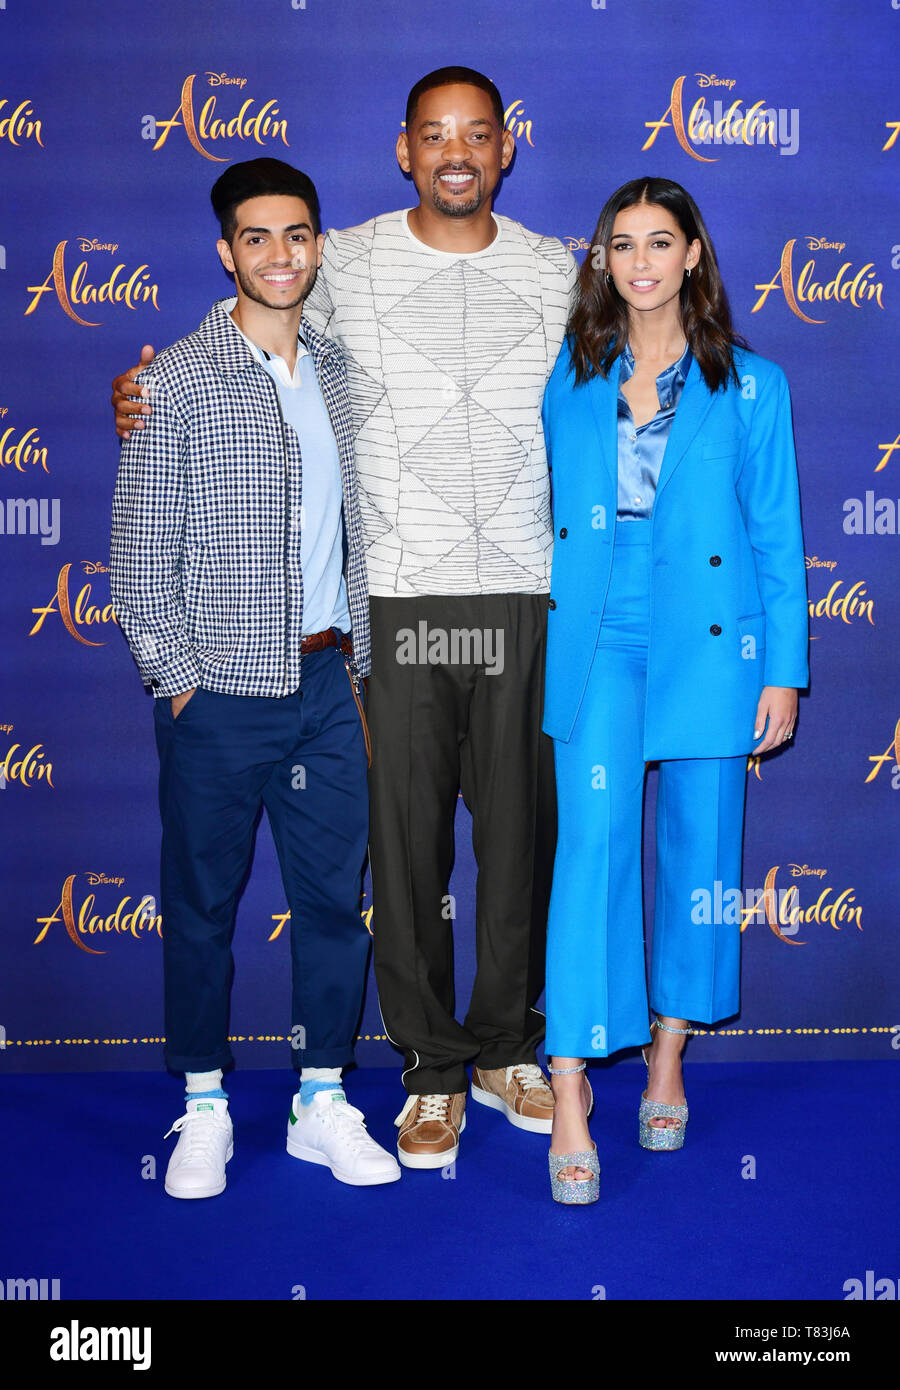 Mena Massoud Will Smith And Naomi Scott Attending A Photocall For Aladdin Held At The Rosewood